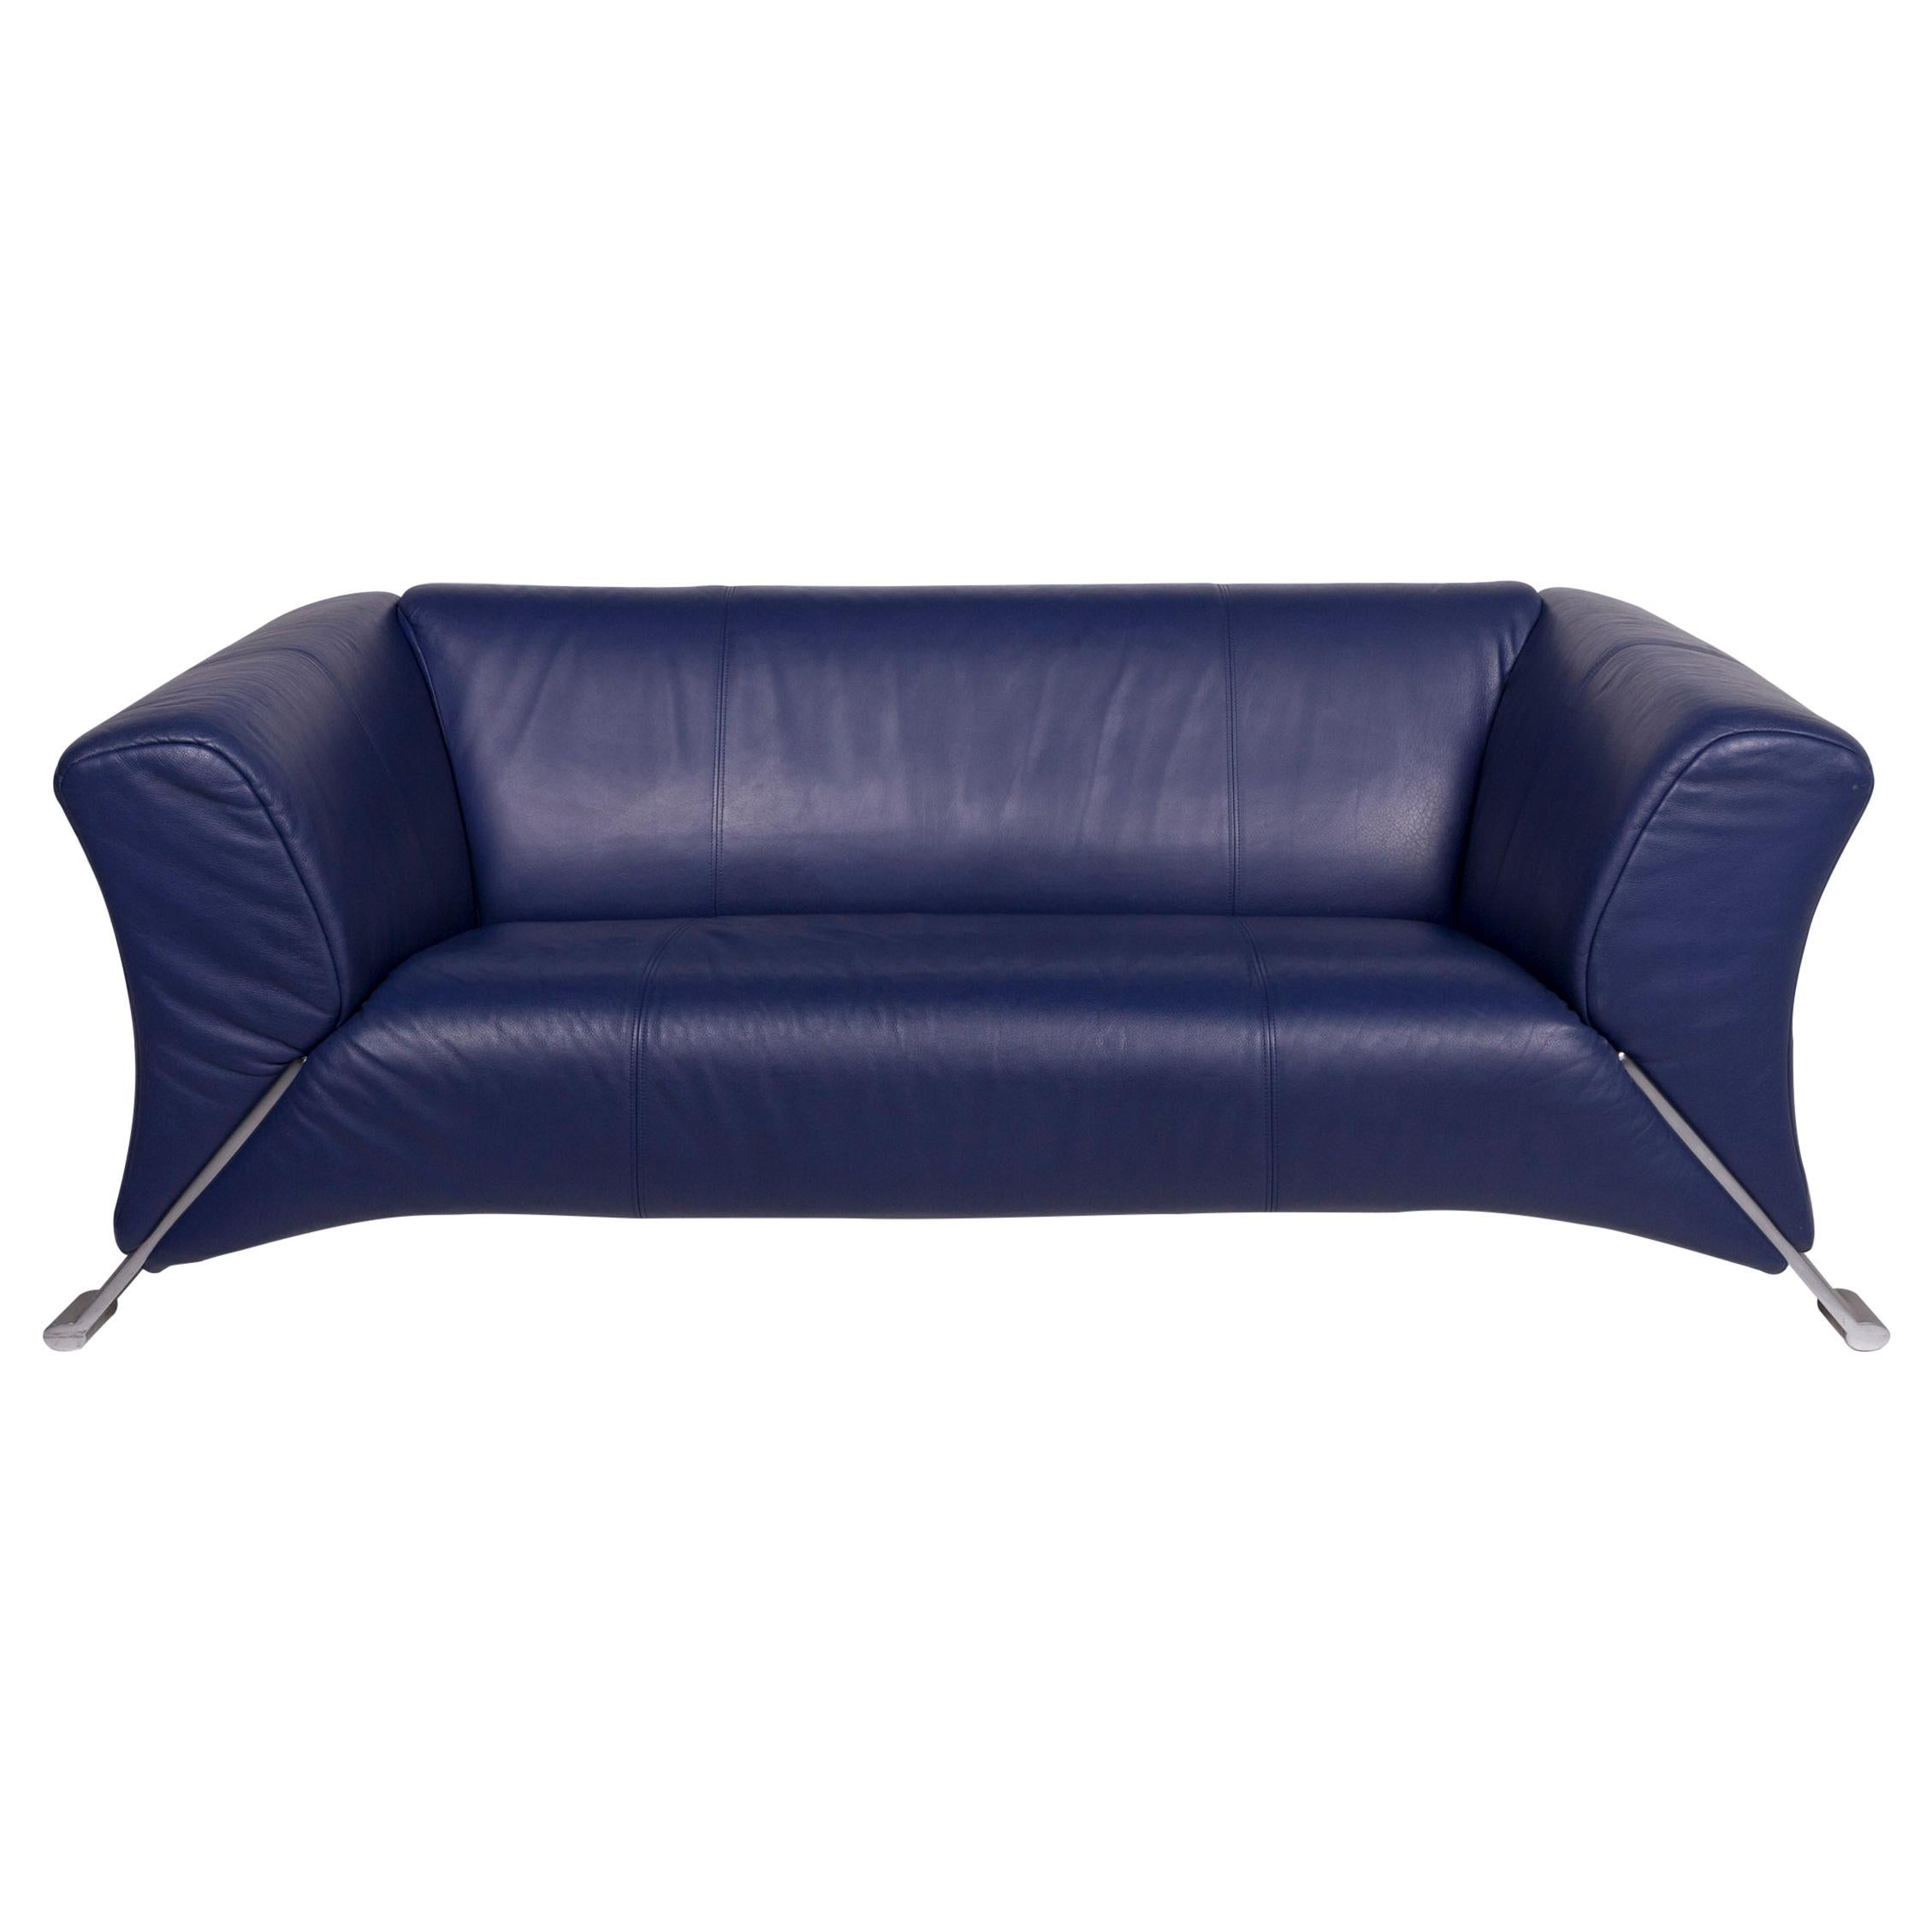 Rolf Benz 322 Leather Sofa Blue Two-Seat Couch